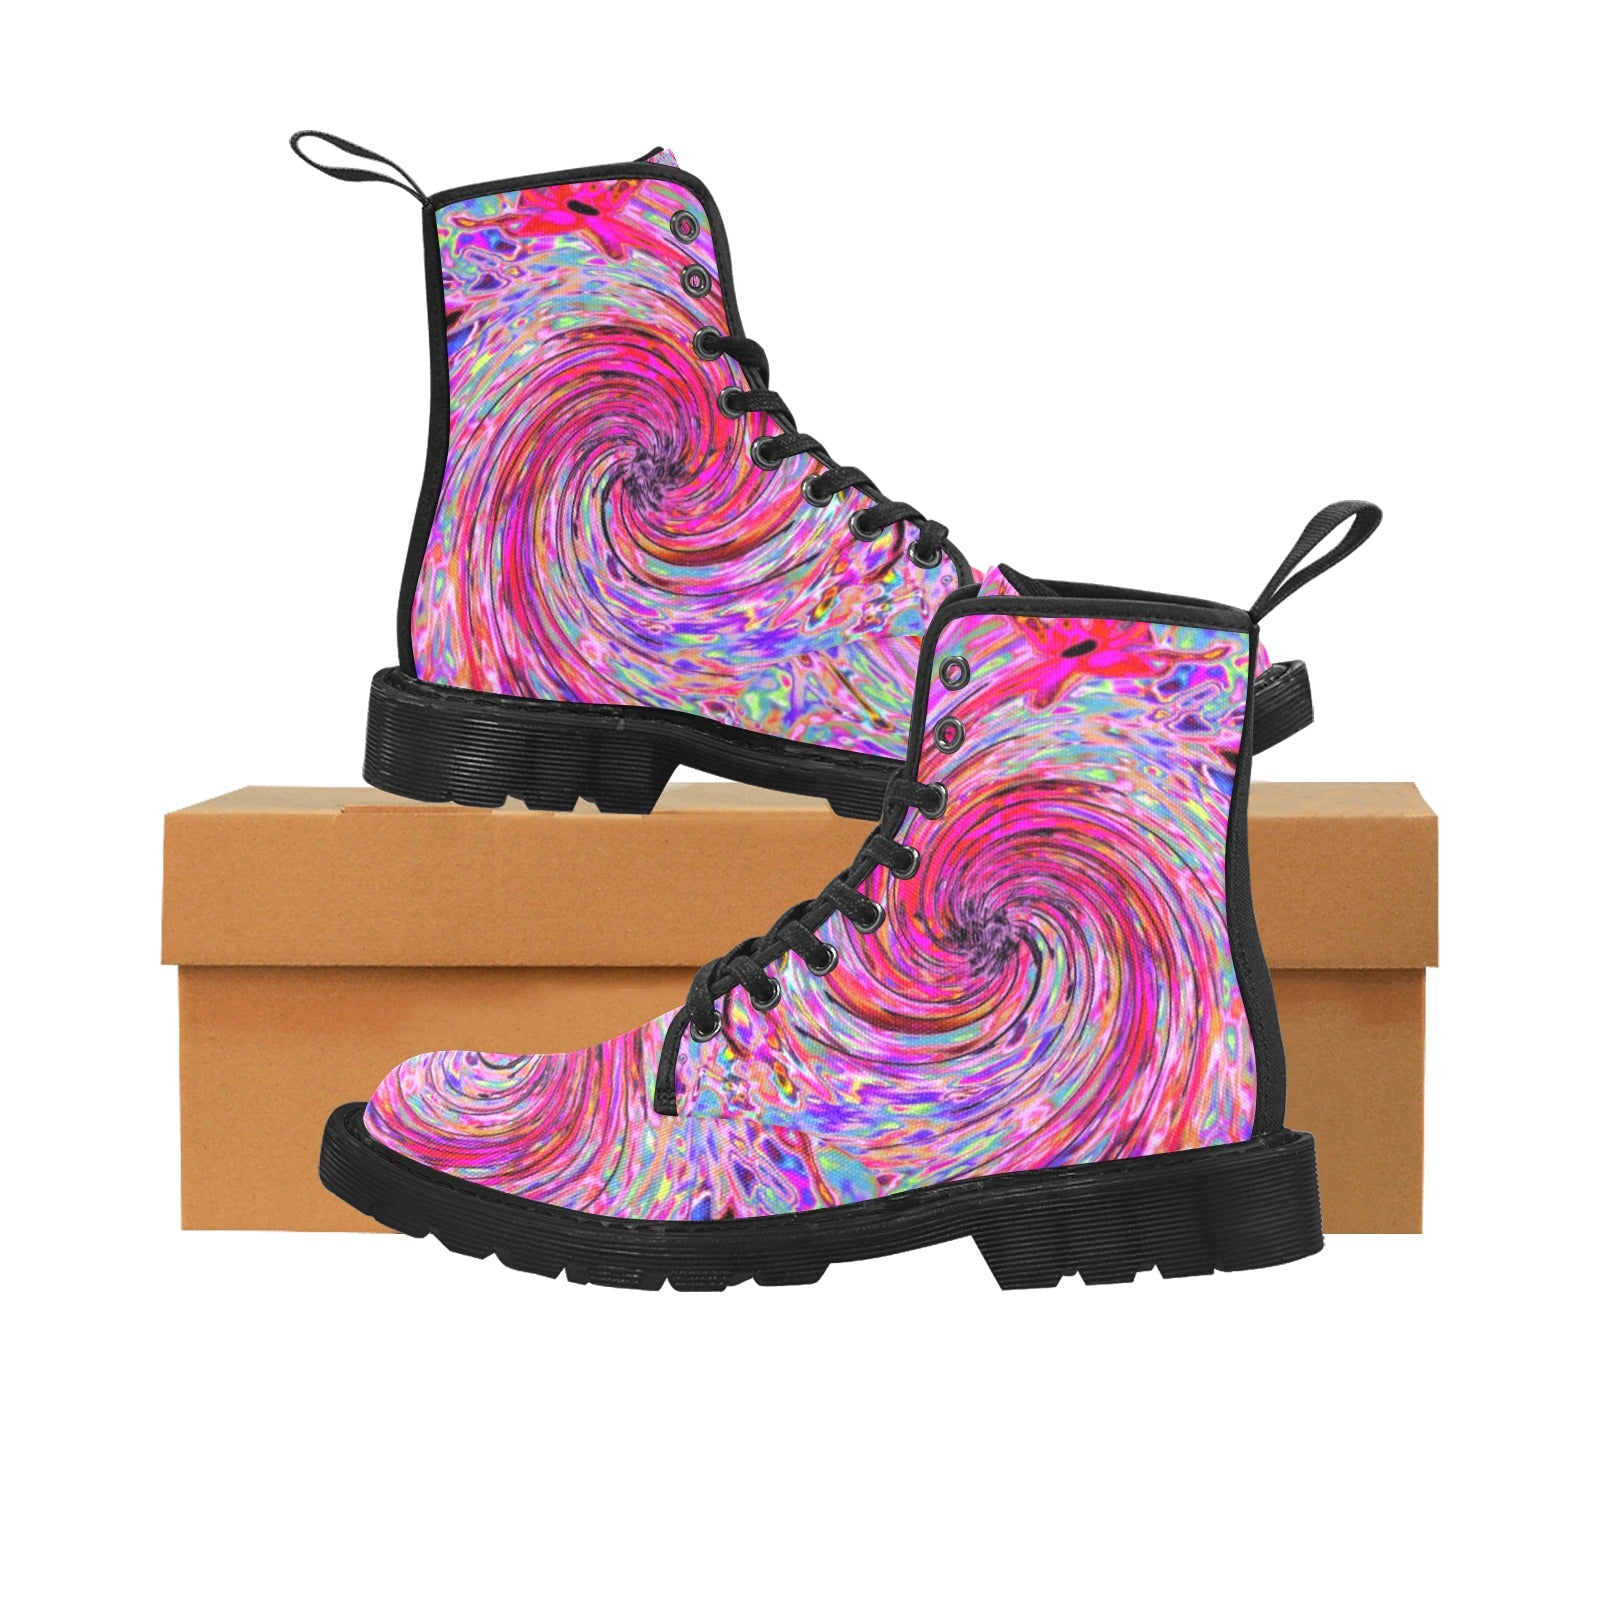 Boots For Women, Cool Abstract Retro Hot Pink and Red Floral Swirl - Black